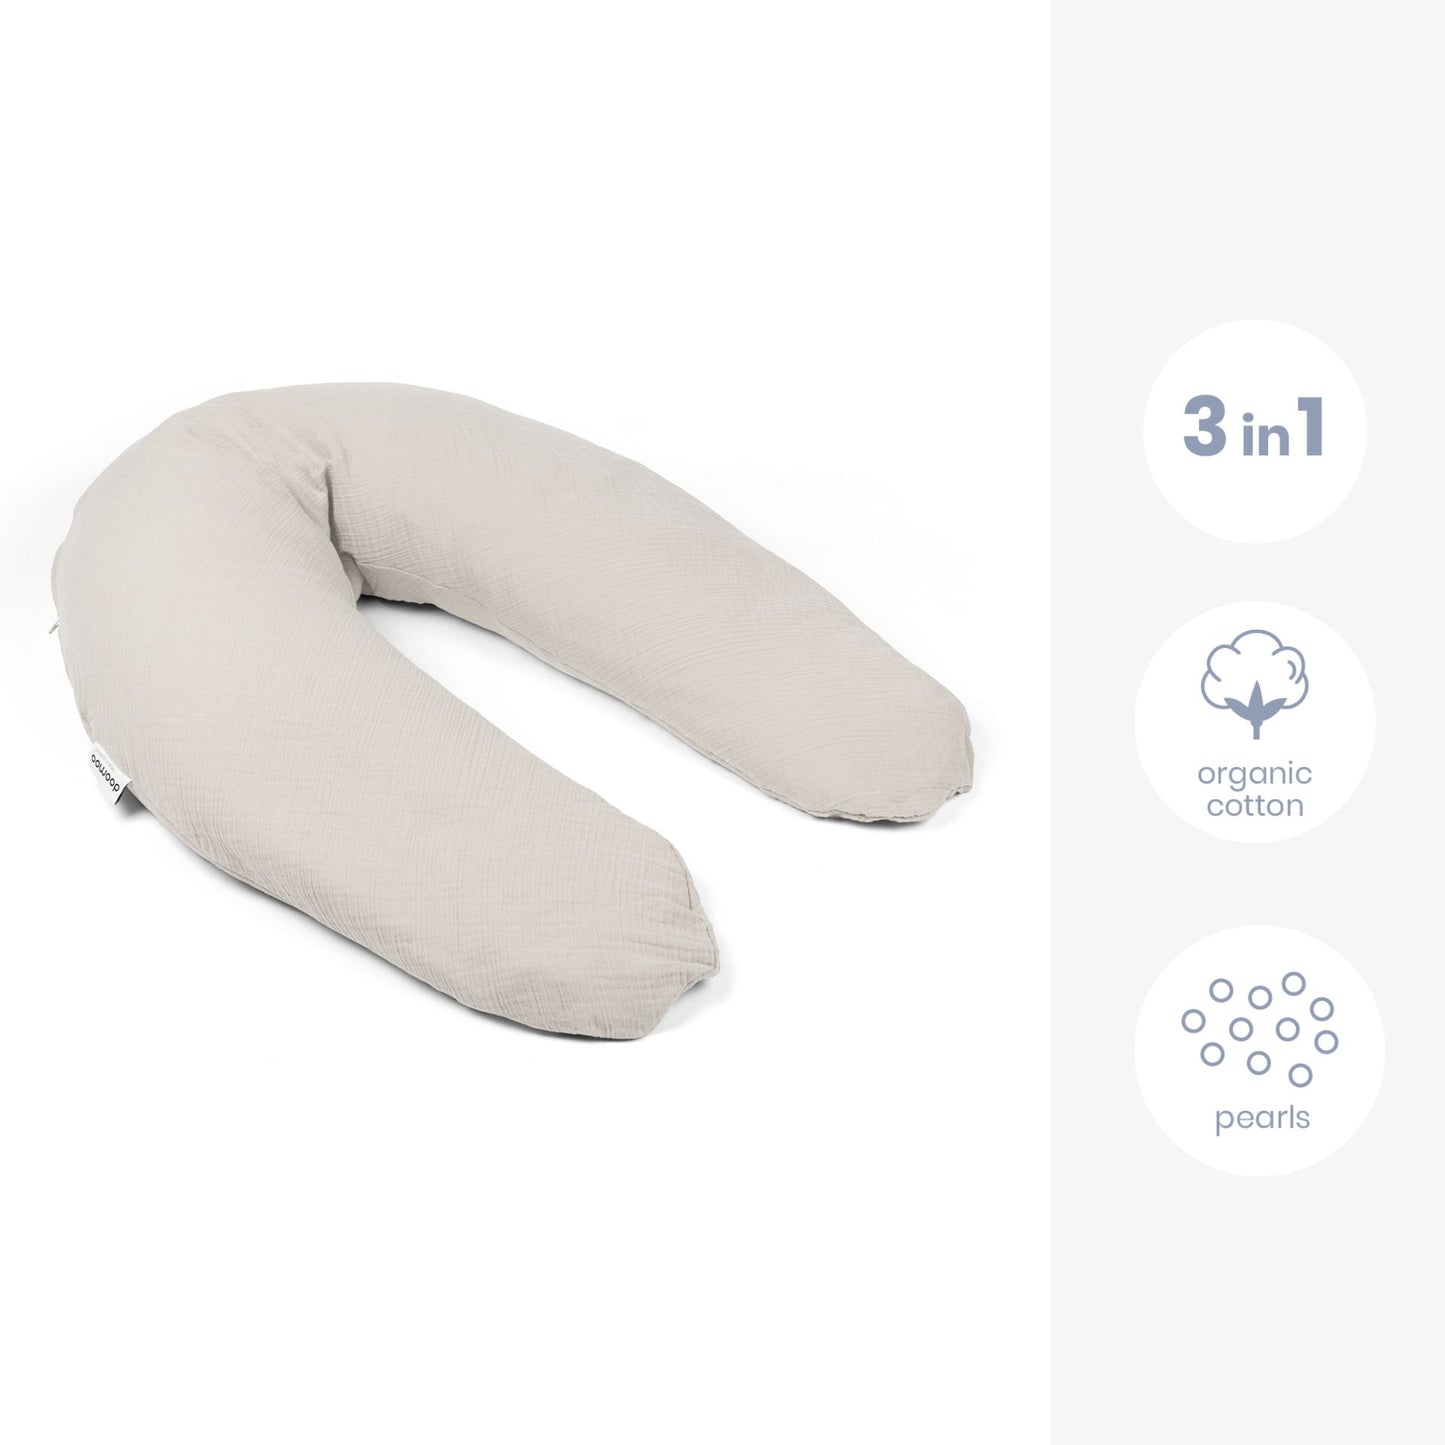 Cover for large pregnancy pillow in organic cotton Almond. 190cm